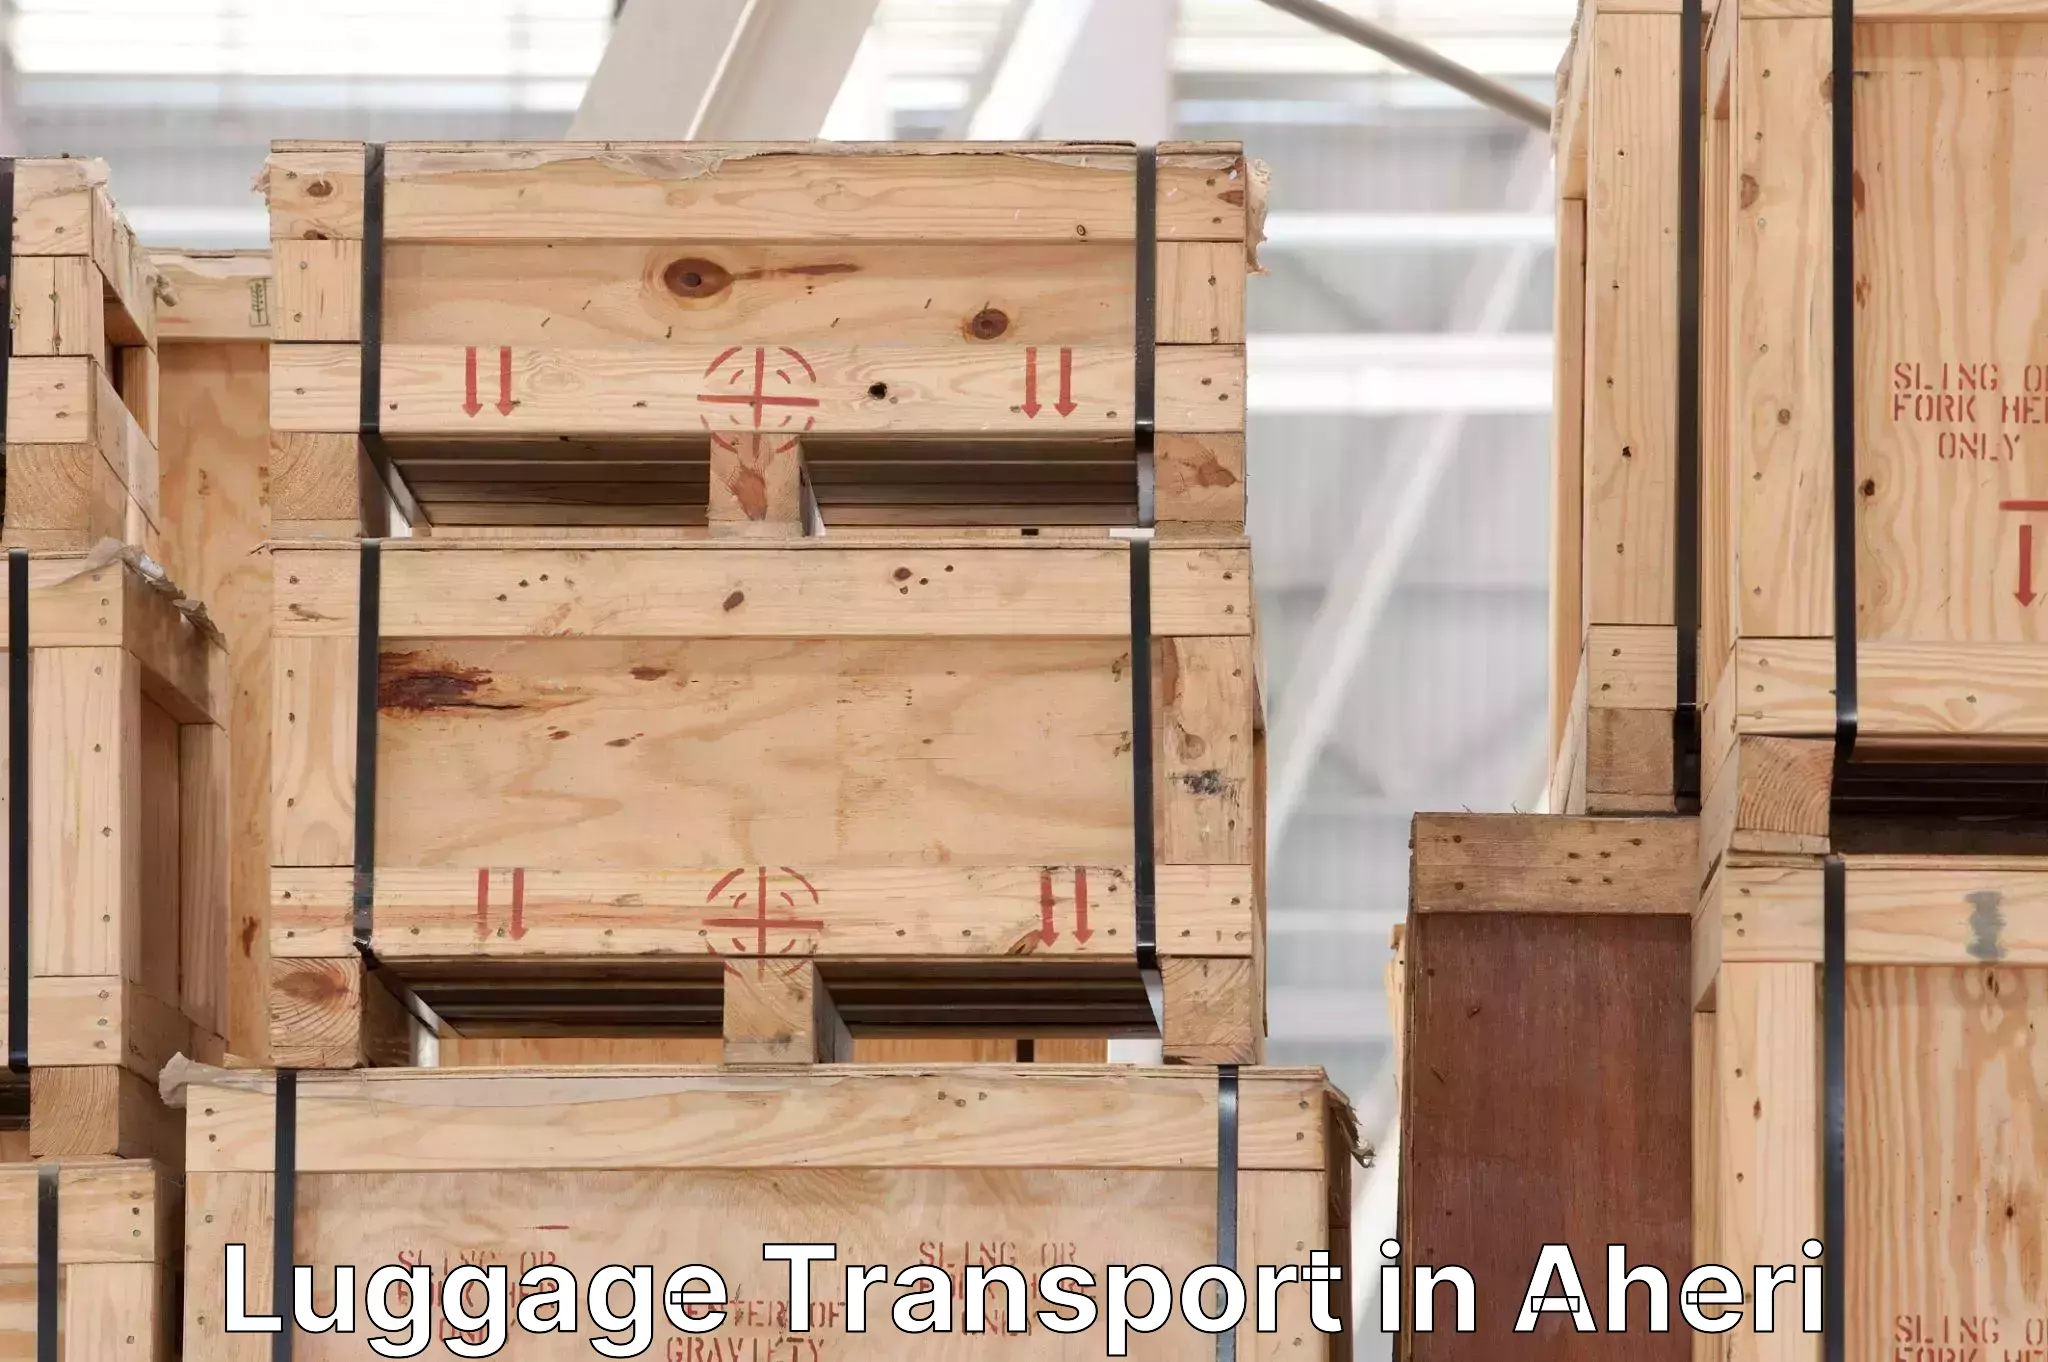 Luggage transport service in Aheri